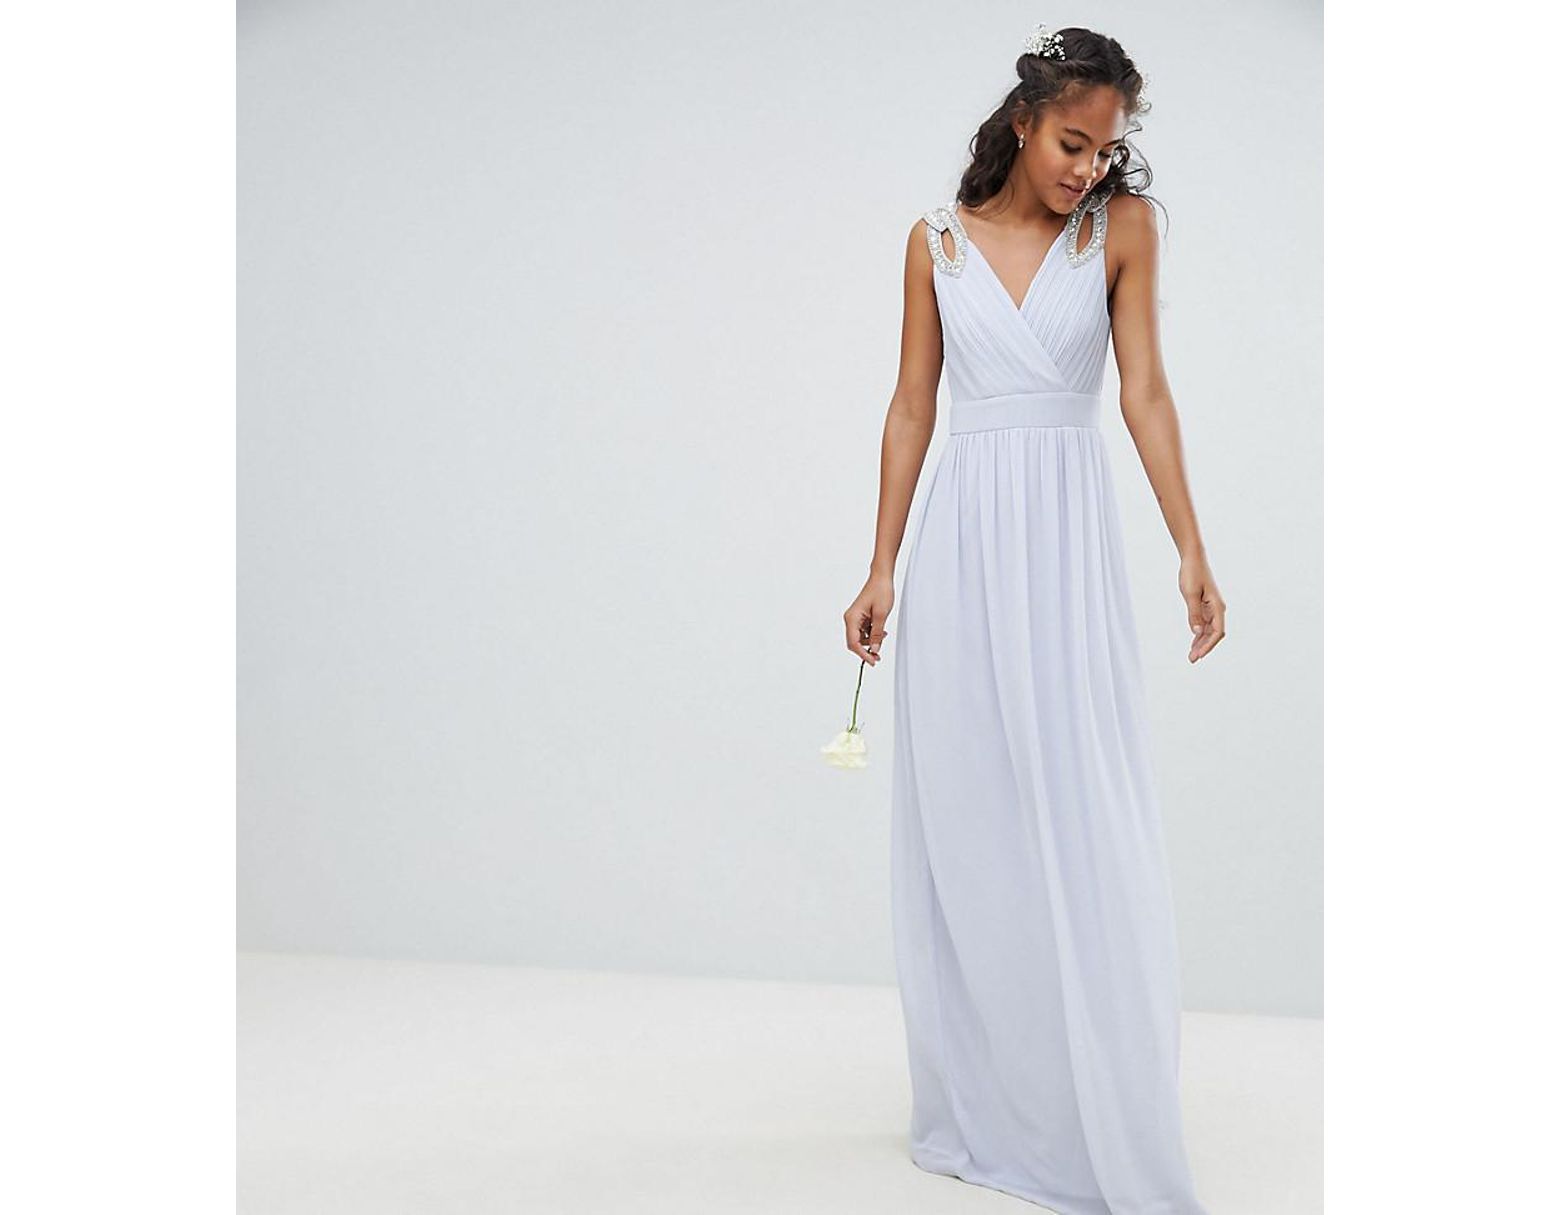 Tfnc Petite Wrap Front Maxi Bridesmaid Dress With Embellished Shoulder